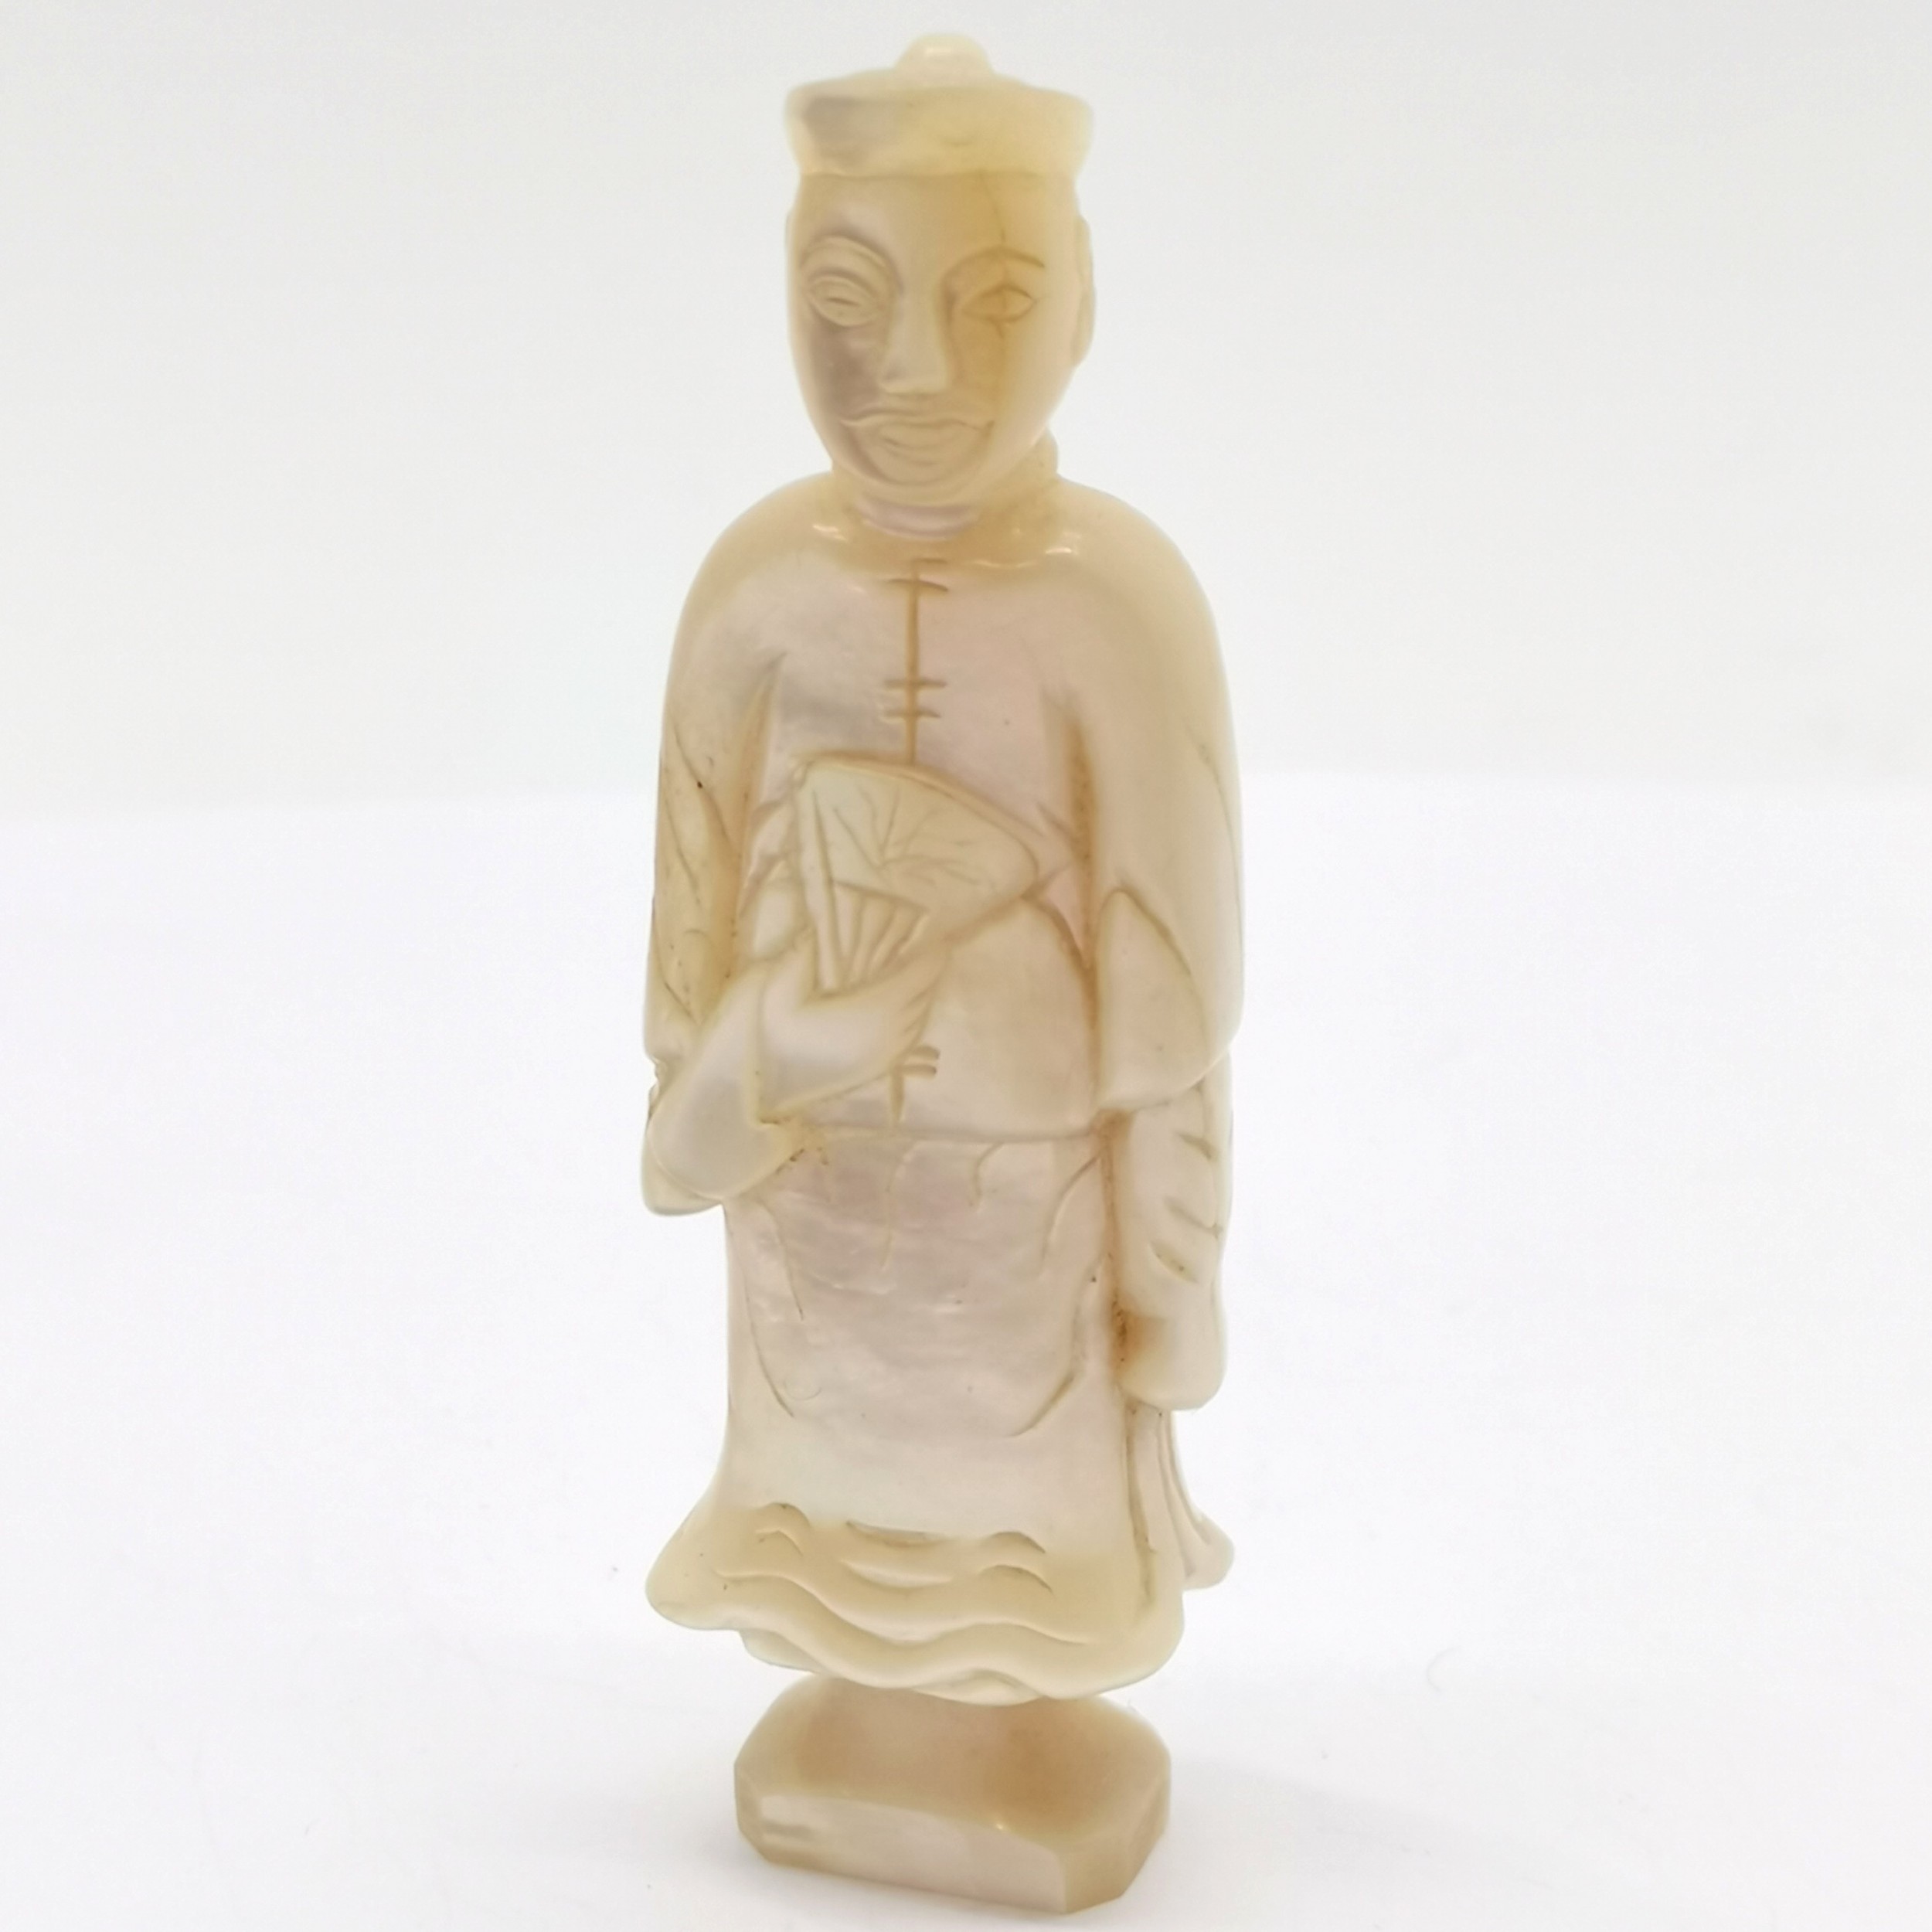 Antique hand carved Chinese mother of pearl desk seal in the form of a mandarin figure - 6.5cm &